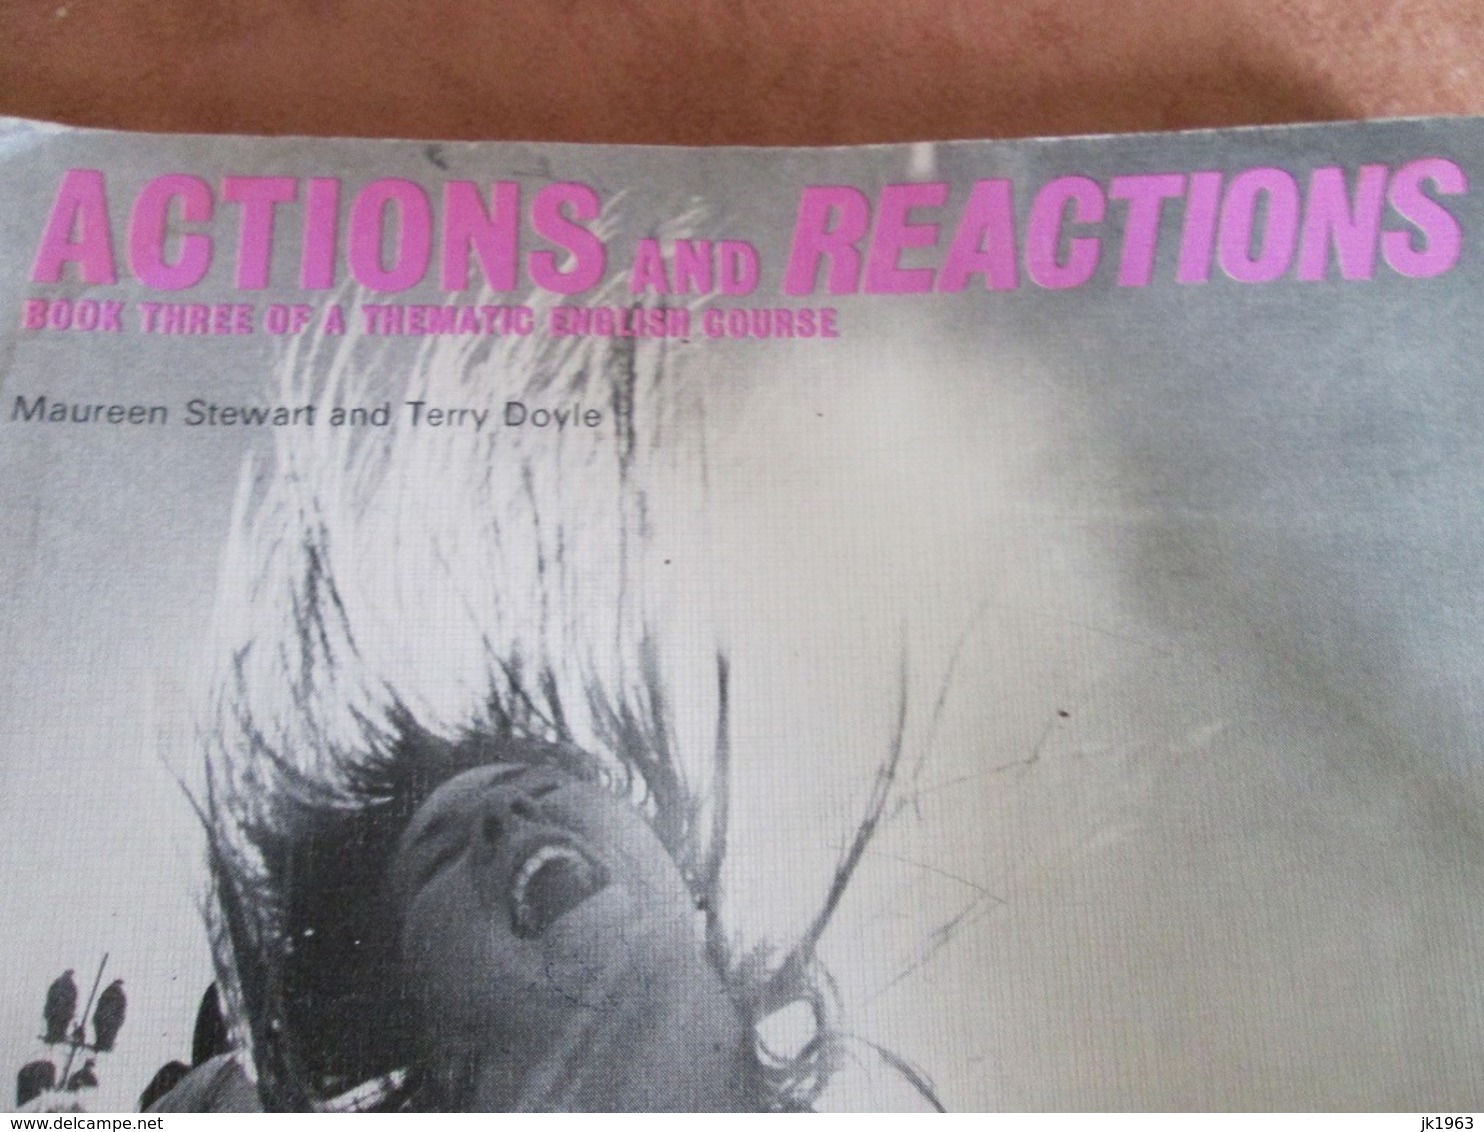 ACTIONS AND REACTIONS, MAUREEN STEWART, TERRY DOYLE 1973 - Kultur